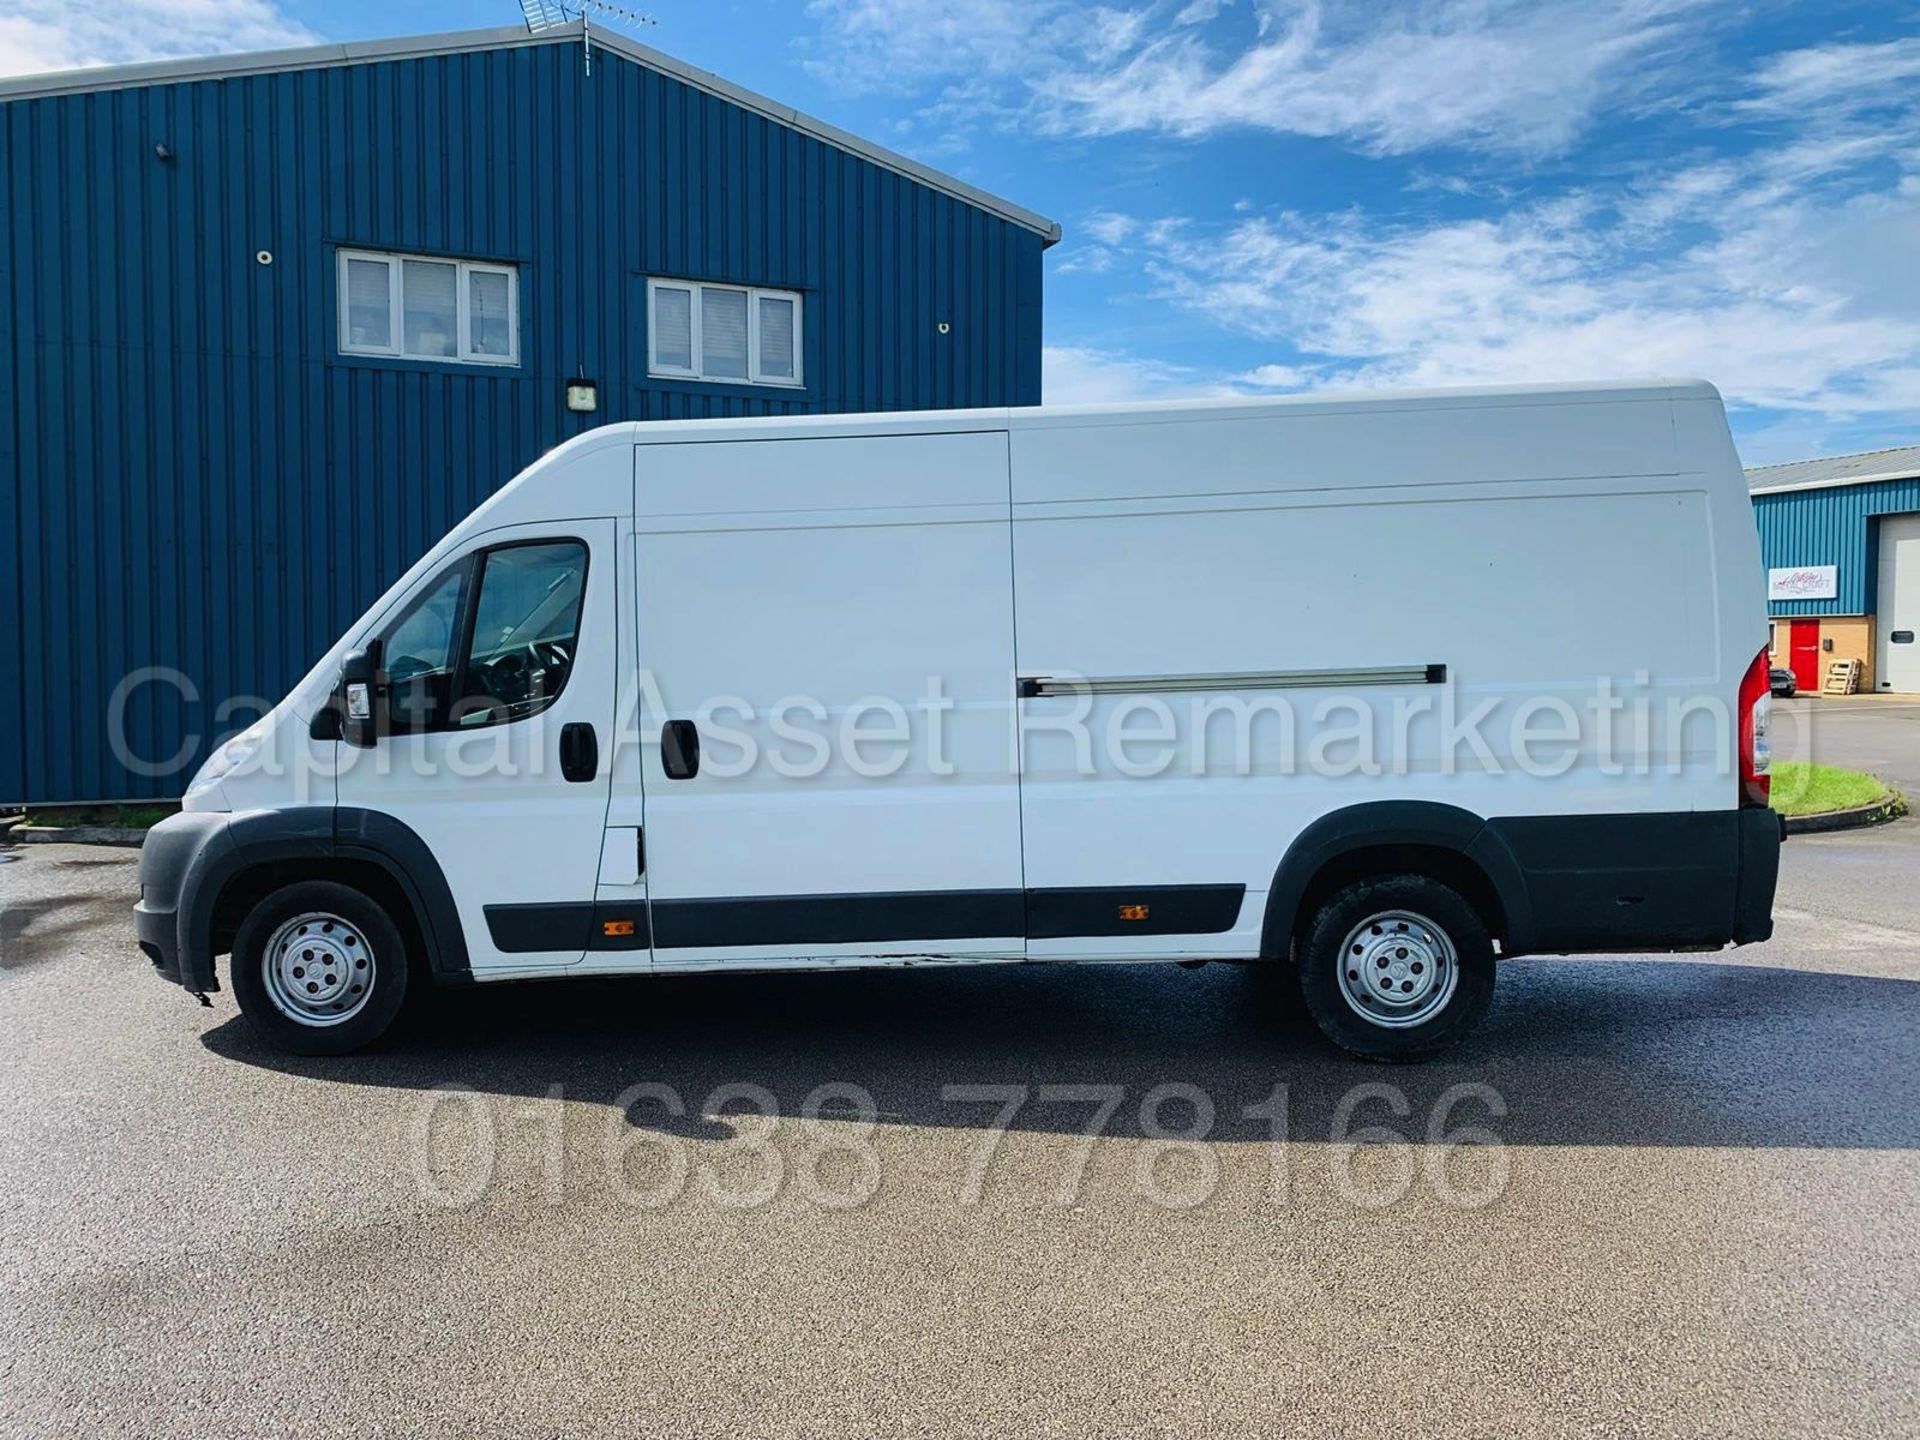 CITROEN RELAY 'L4 EXTRA LWB HI-ROOF' (2012) '2.2 HDI - 130 BHP - 6 SPEED' **LOW MILES** - Image 3 of 21